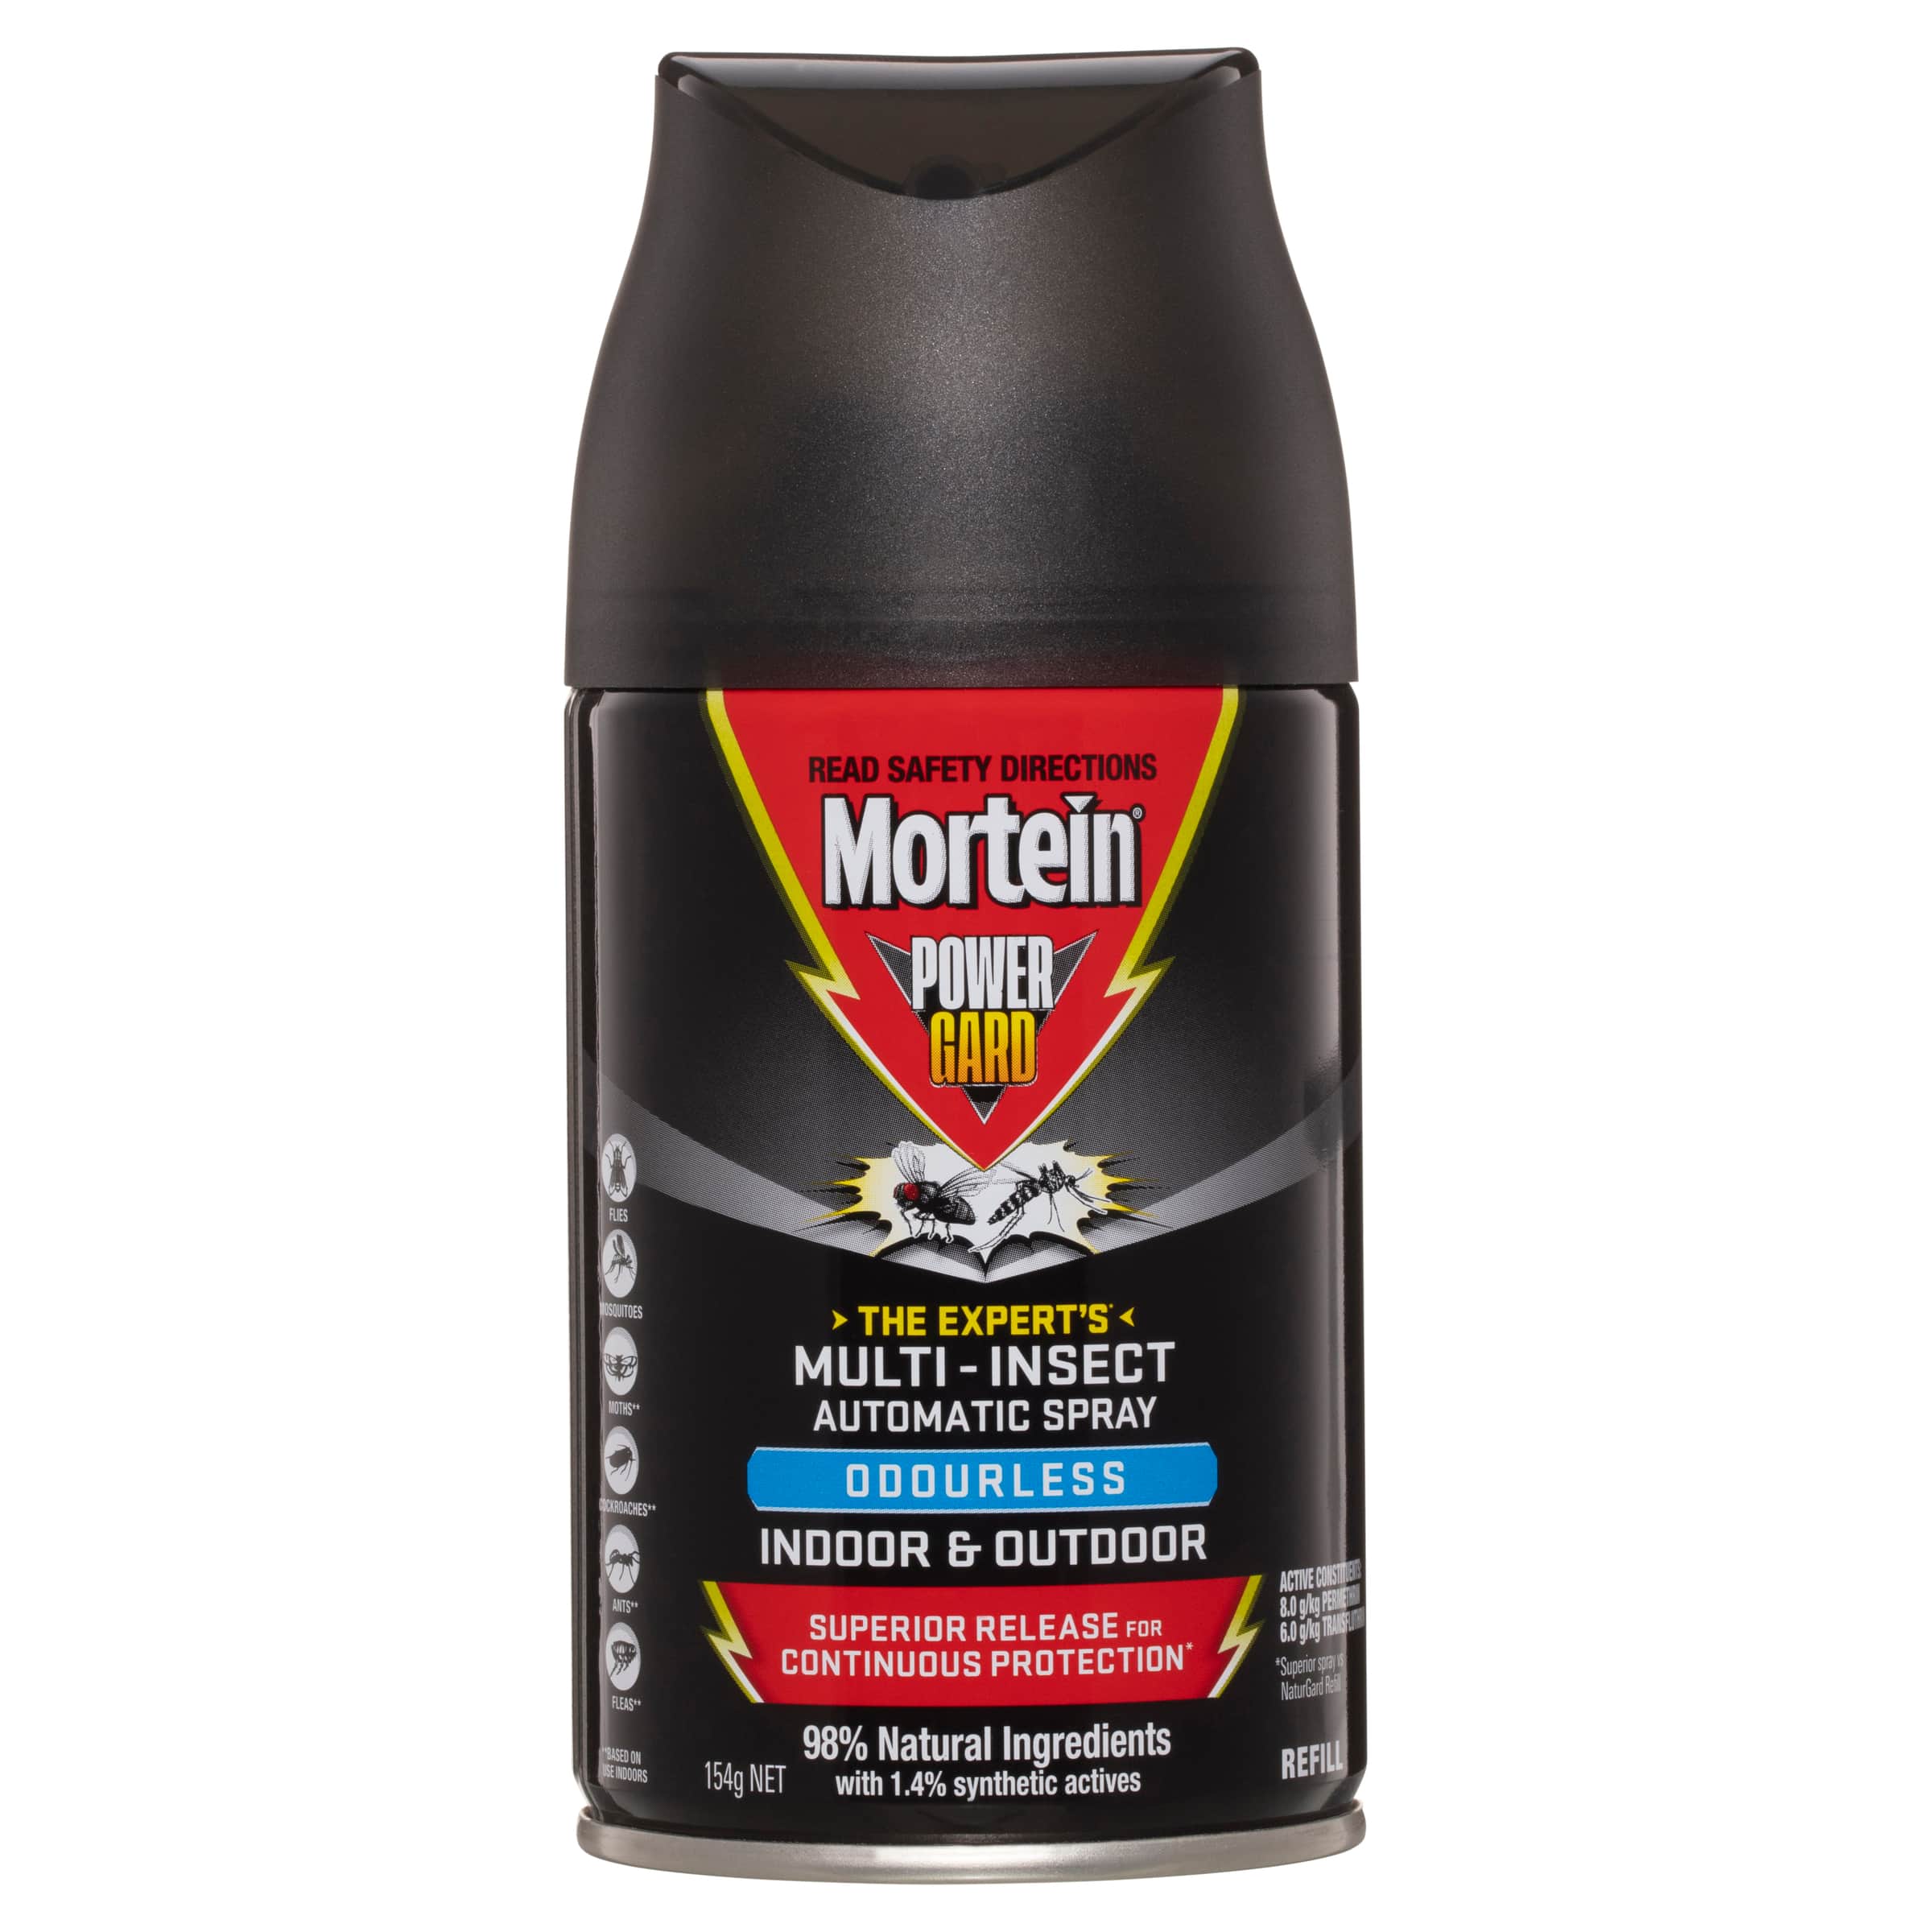 Mortein PowerGard Multi-Insect Automatic Refill Odourless 154g